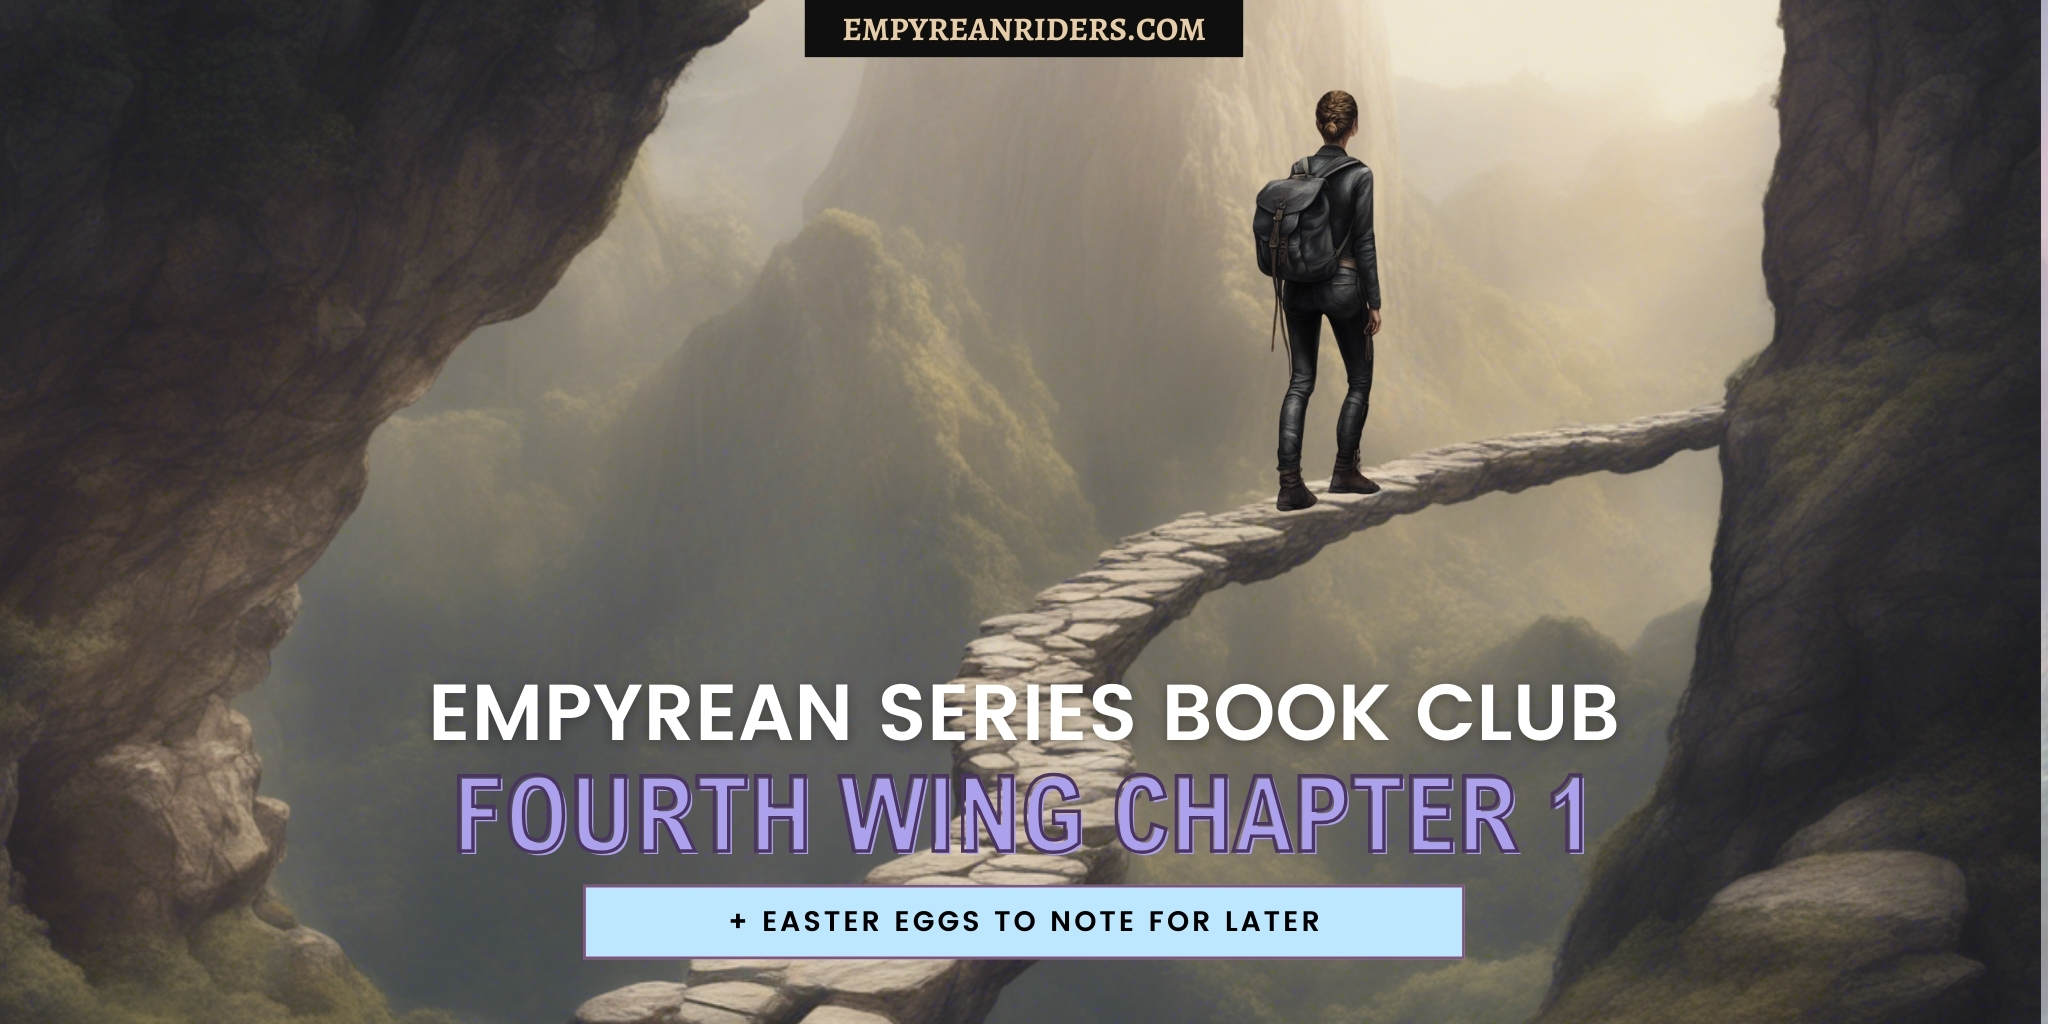 Fourth Wing Chapter 1 – Read Along Book Club